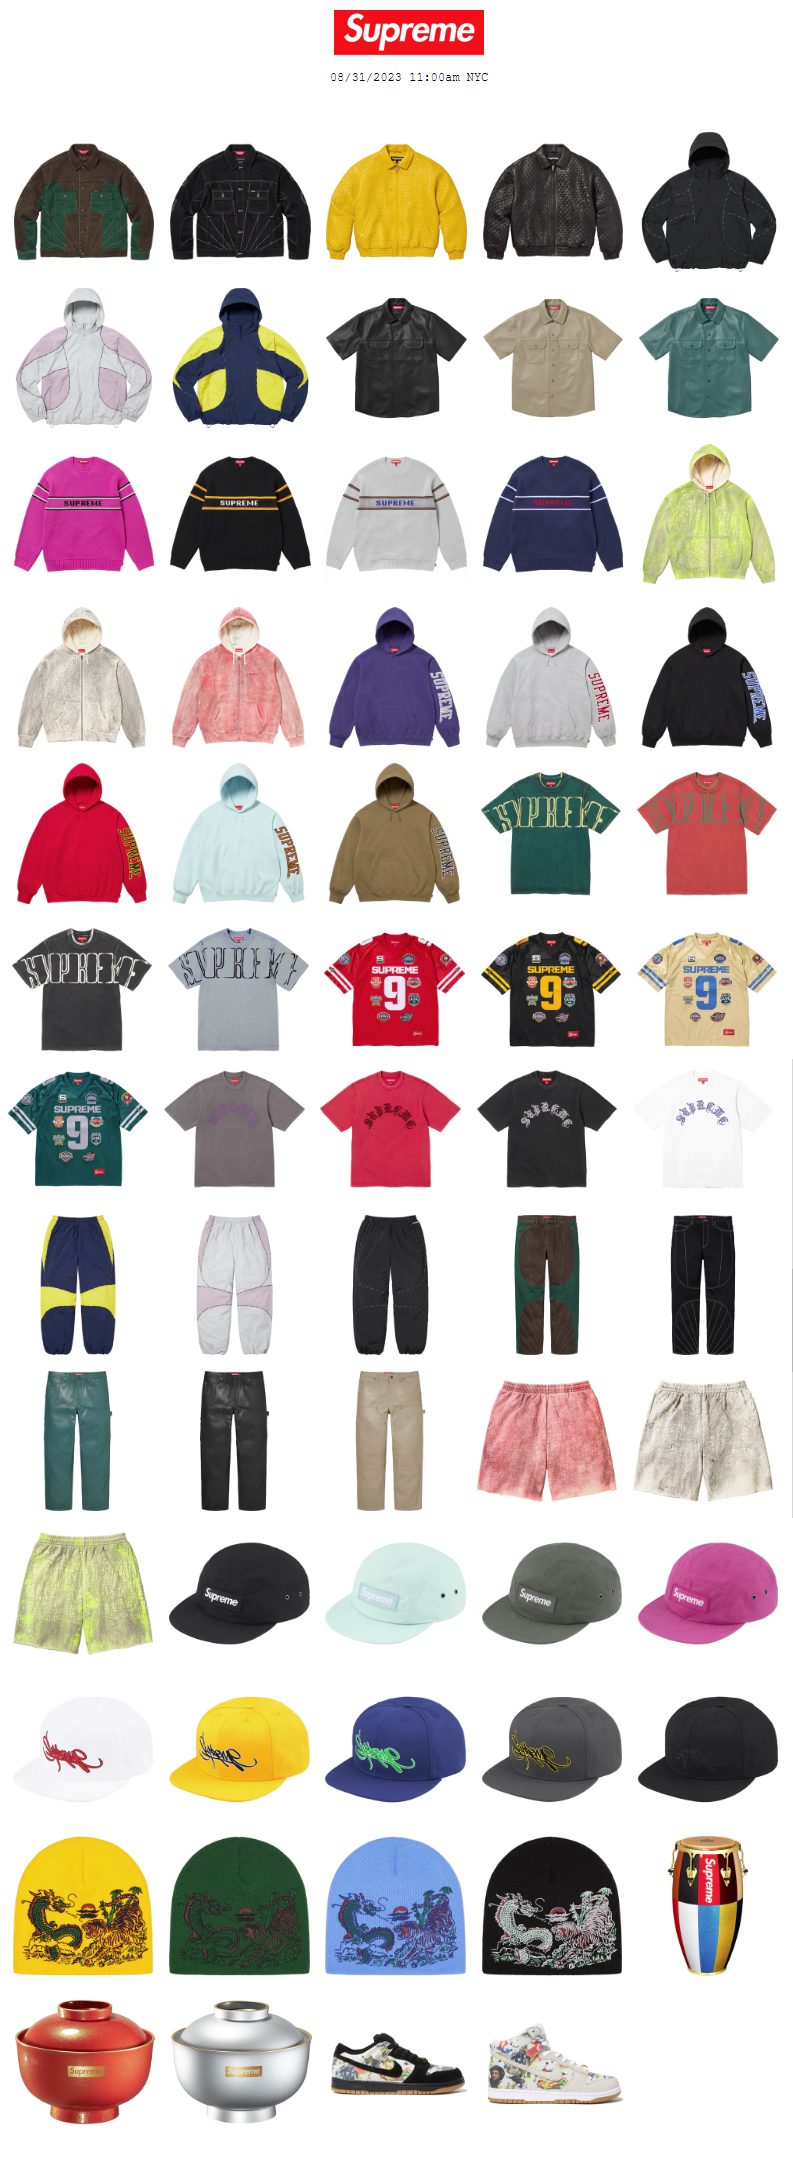 supreme-online-store-20230902-week2-23fw-23aw-release-items-list